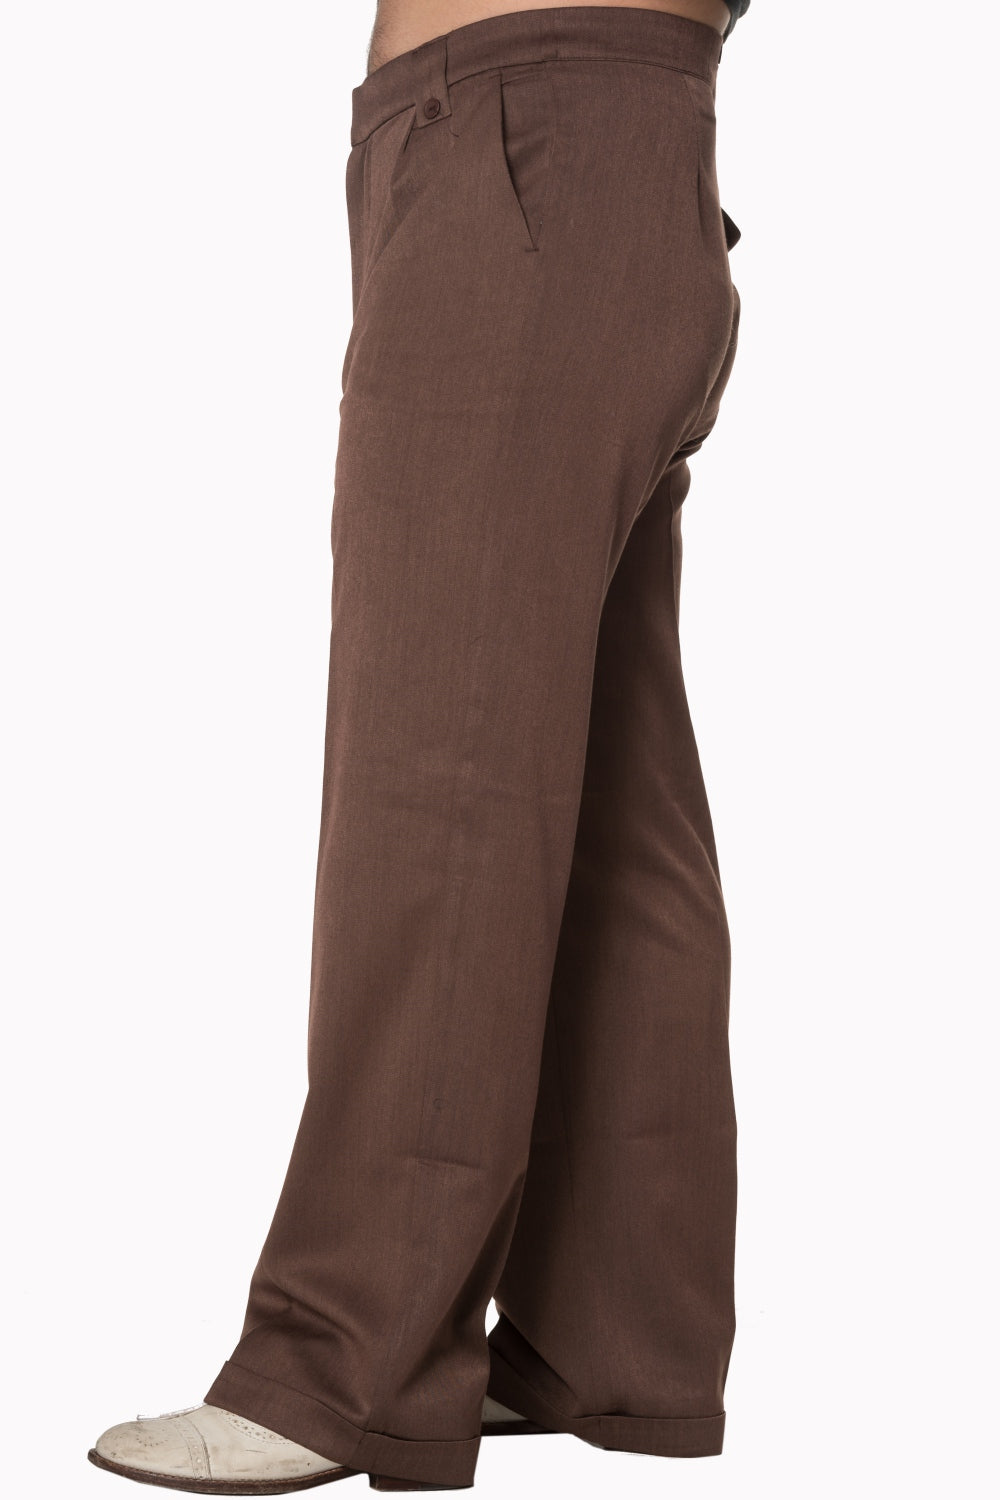 SIDELINE Marte Trousers Black in Natural | Lyst